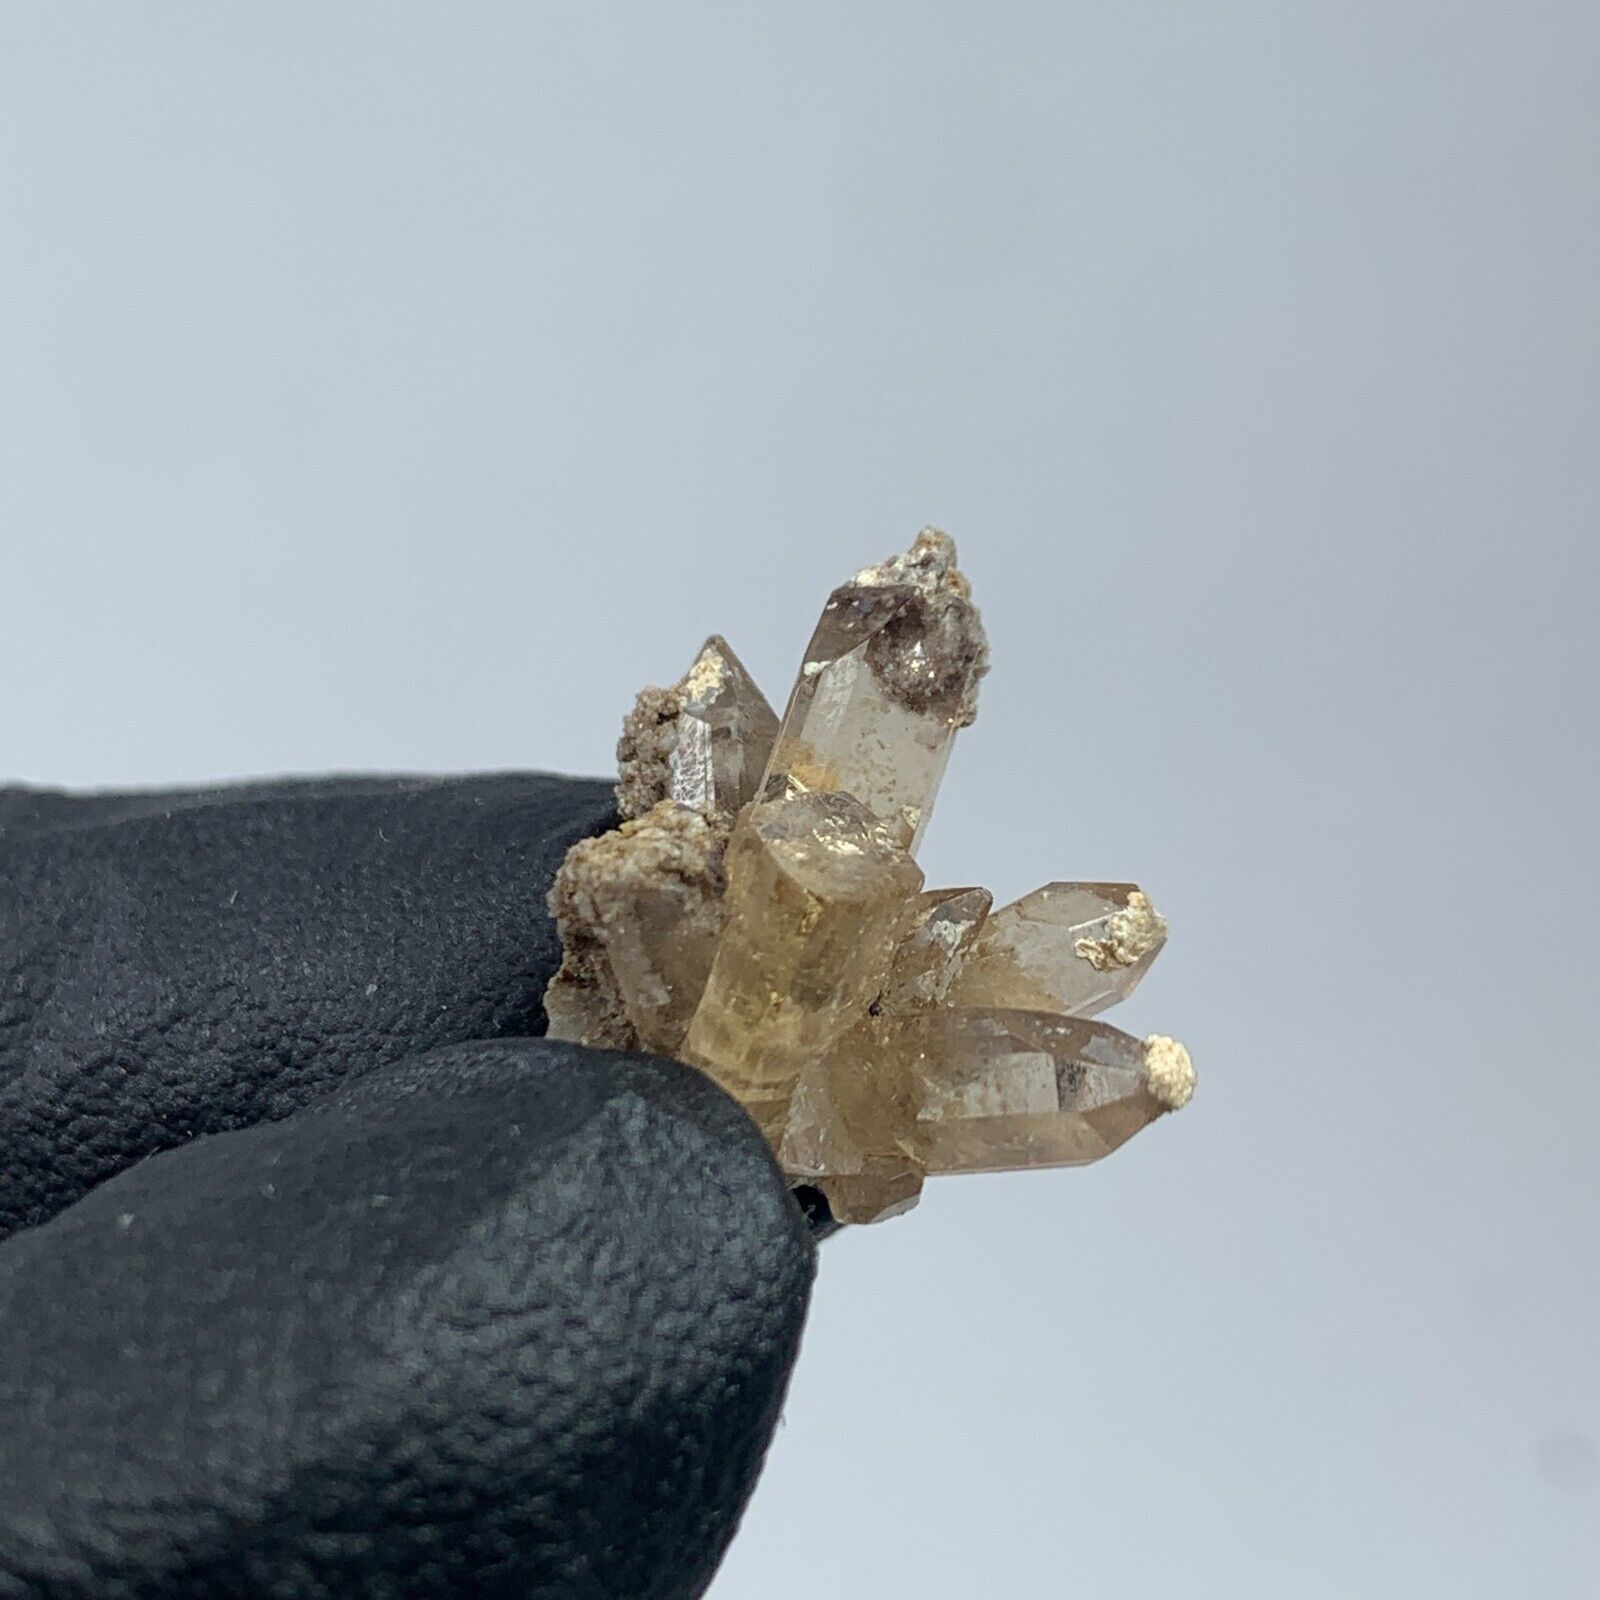 RED/CHAMPAGNE TOPAZ W/RUTILE CRYSTAL CLUSTER ON MATRIX FROM SAN LUIS POTOSI MEXI